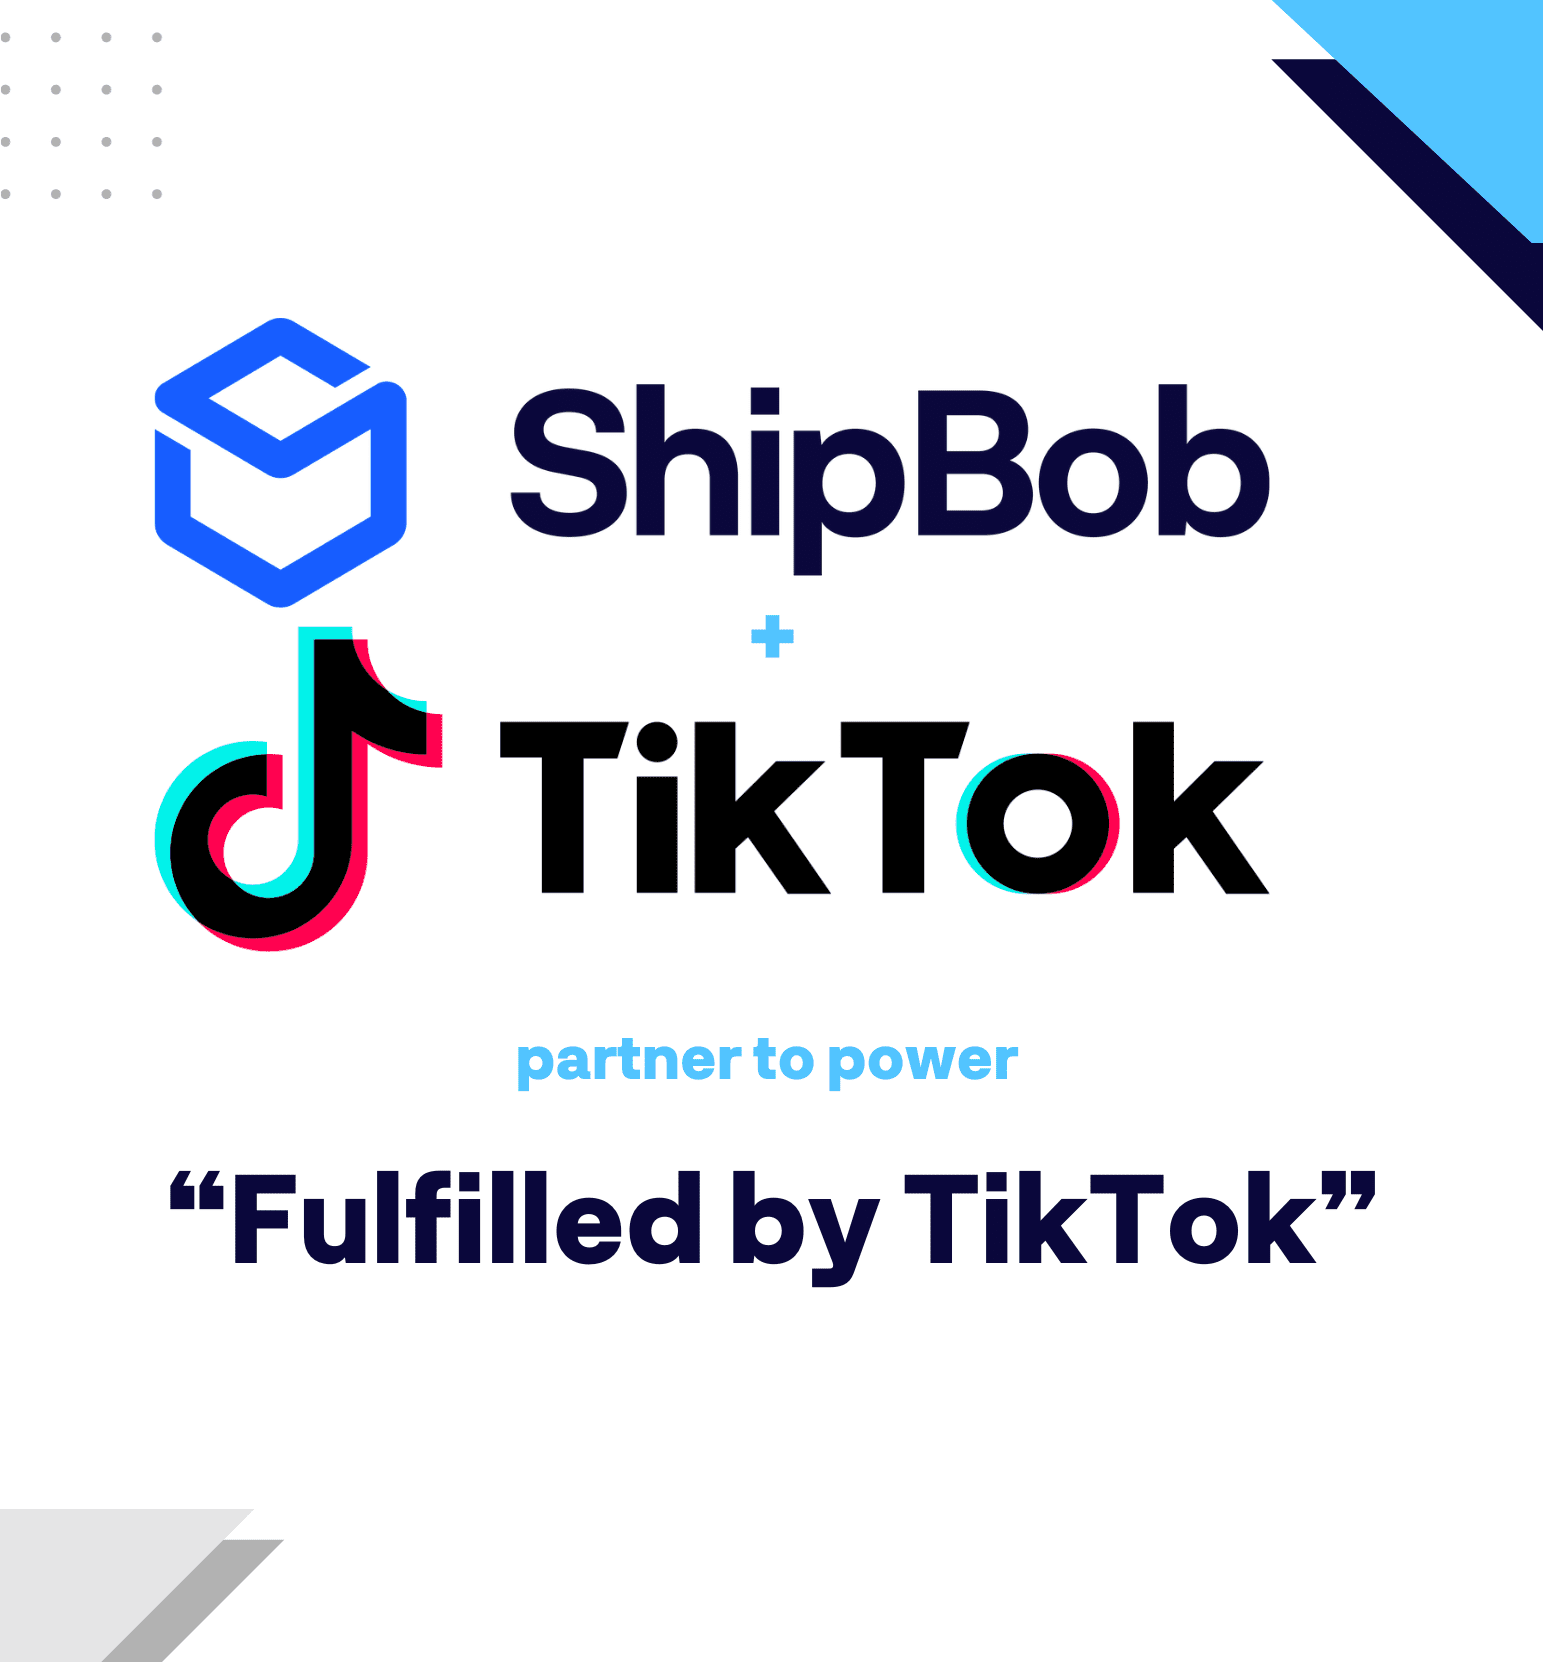 tiktok big sale, it's so cheap, hurry up and place your order, first c